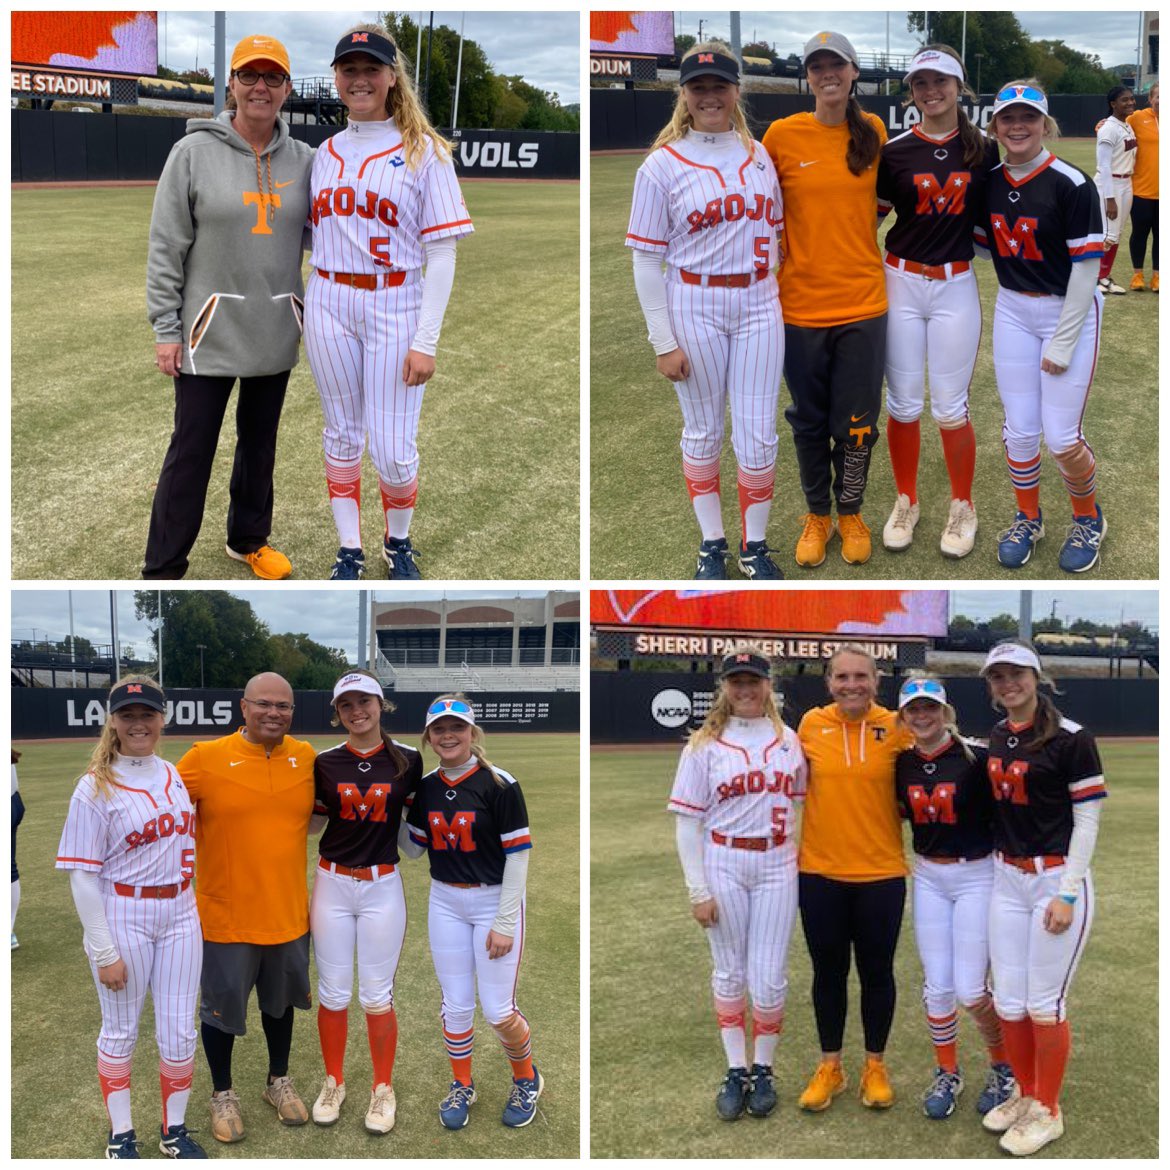 Had a great time at @Vol_Softball camp this weekend! 🧡 Learned a lot and met some great people. Thank you @KarenWeekly @MRhodesSmith @CoachMalveaux @KateMalveaux